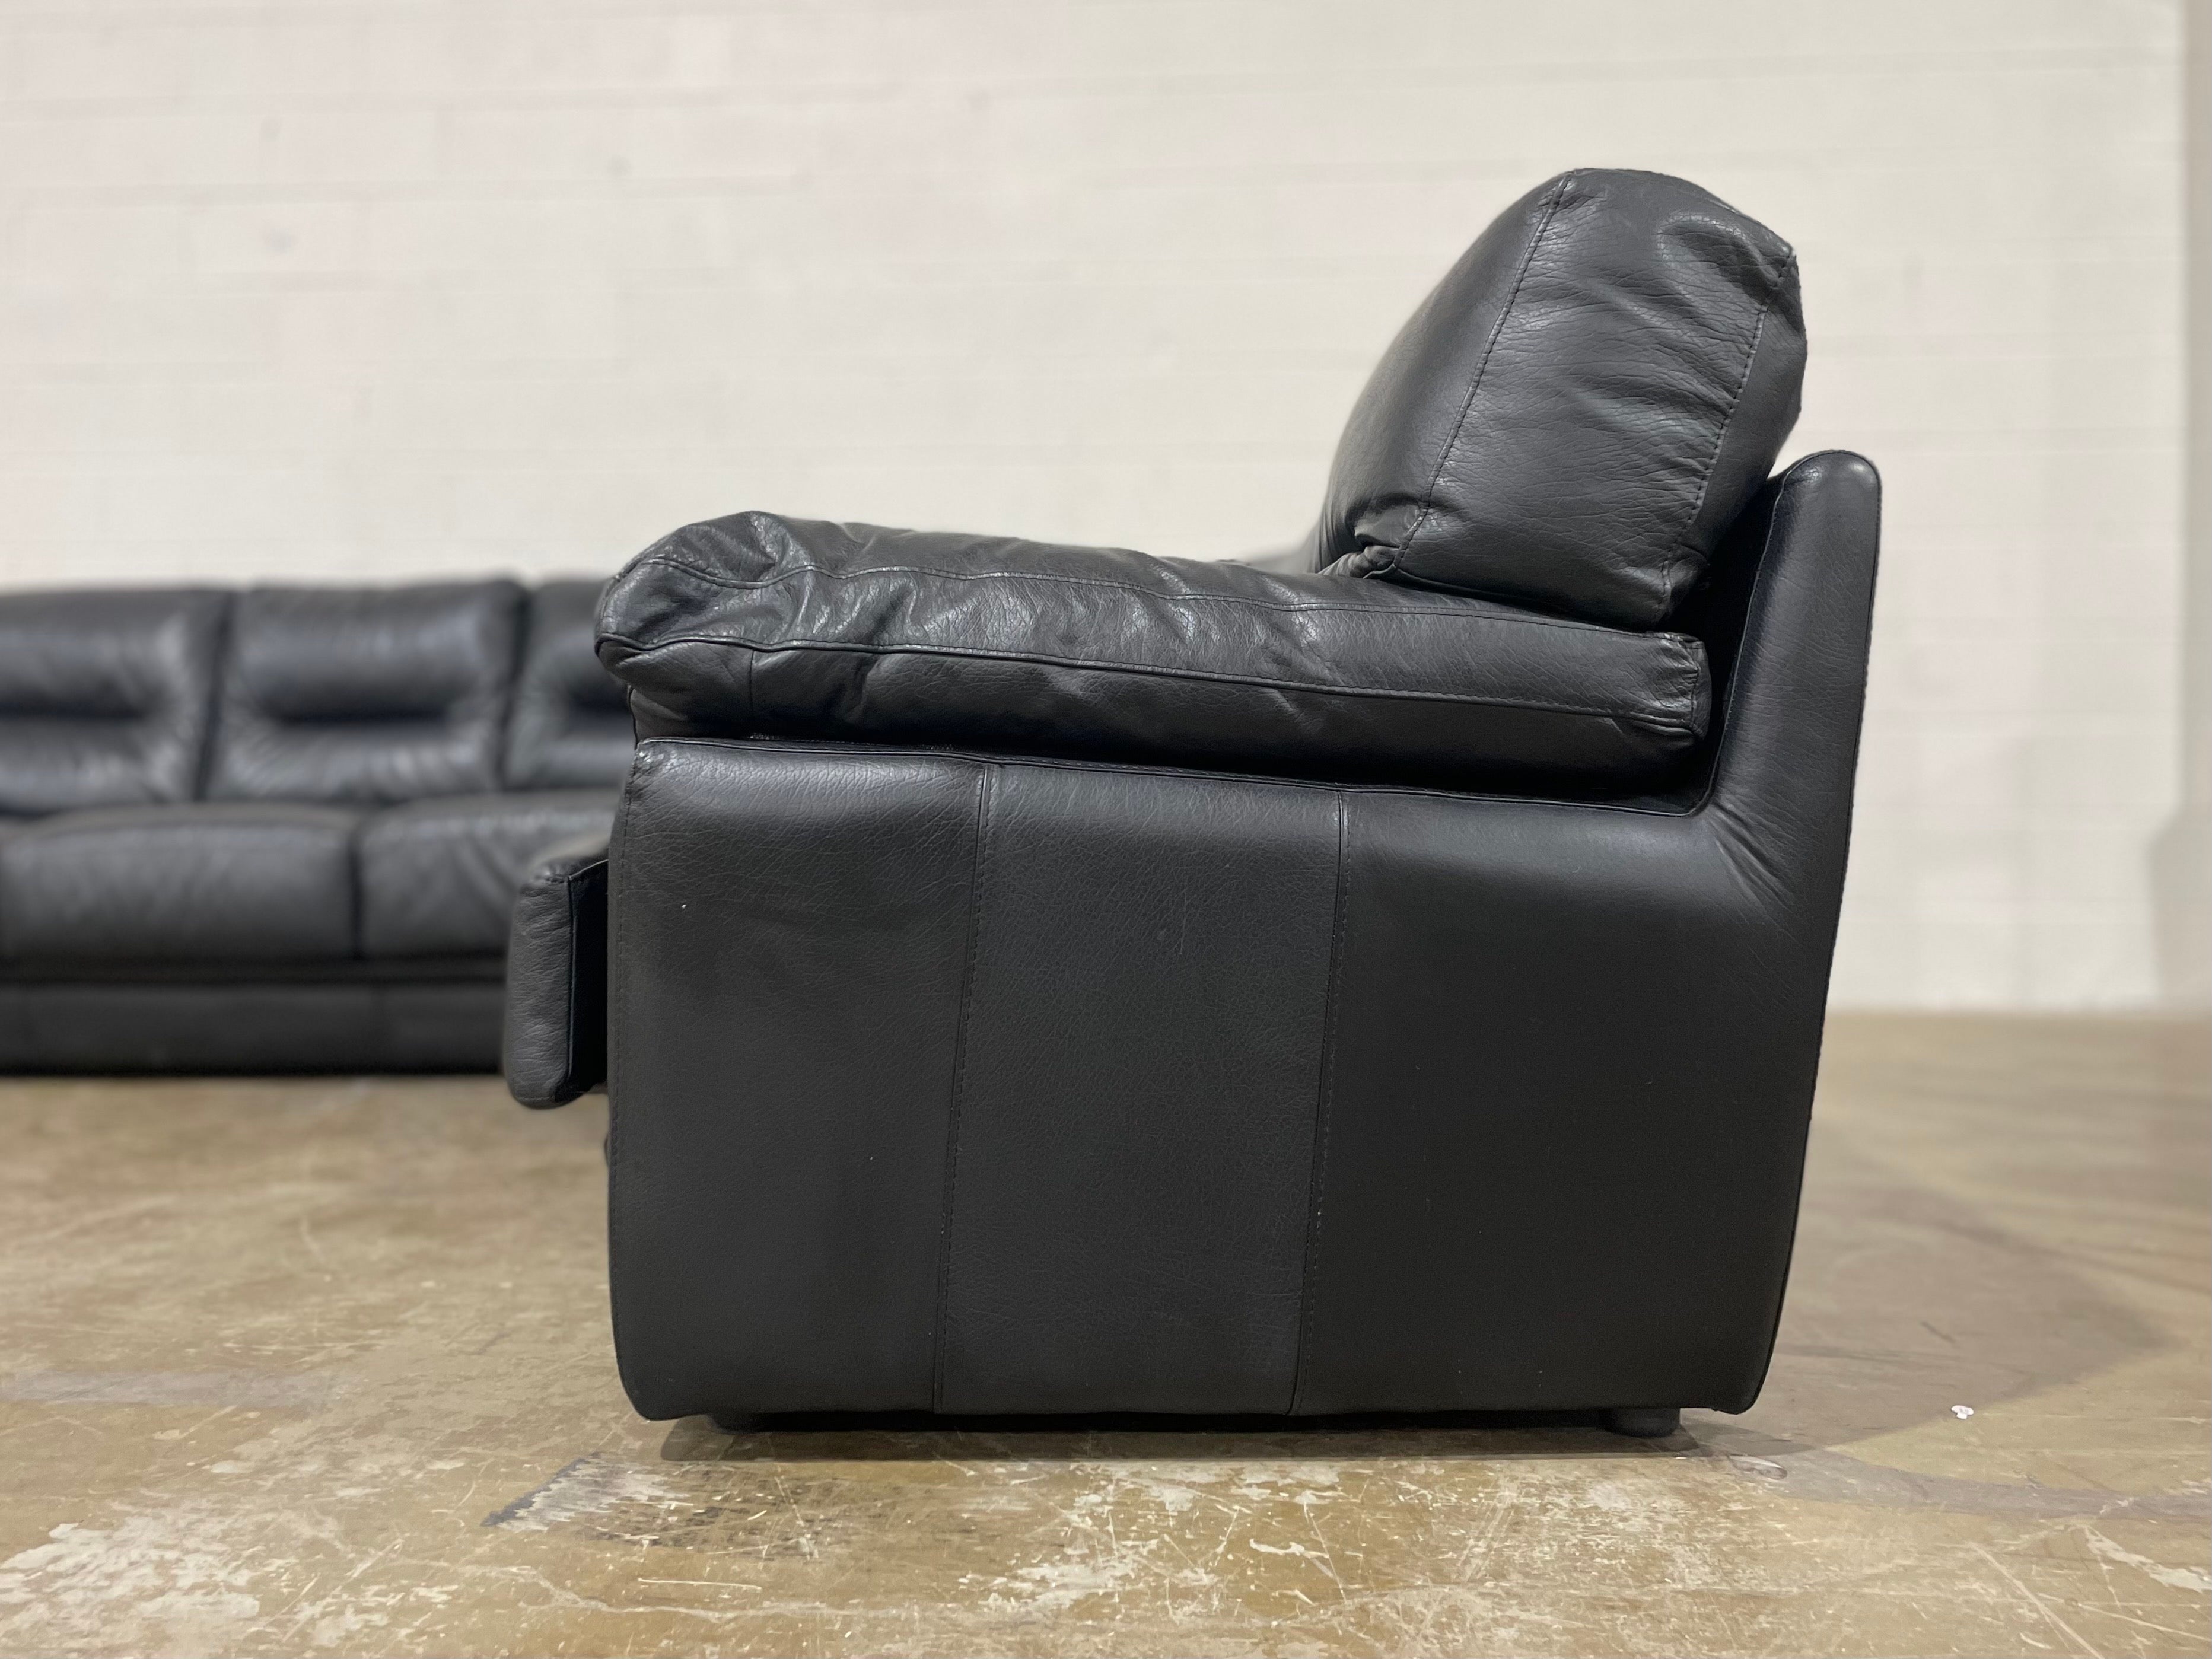 Post modern Roche Bobois black leather sectional sofa, Purchased new in 1992. Excellent condition - very rarely, if ever used. Goose down back cushions. Full grain leather is soft and supple, it has been cleaned and conditioned and is ready for use.